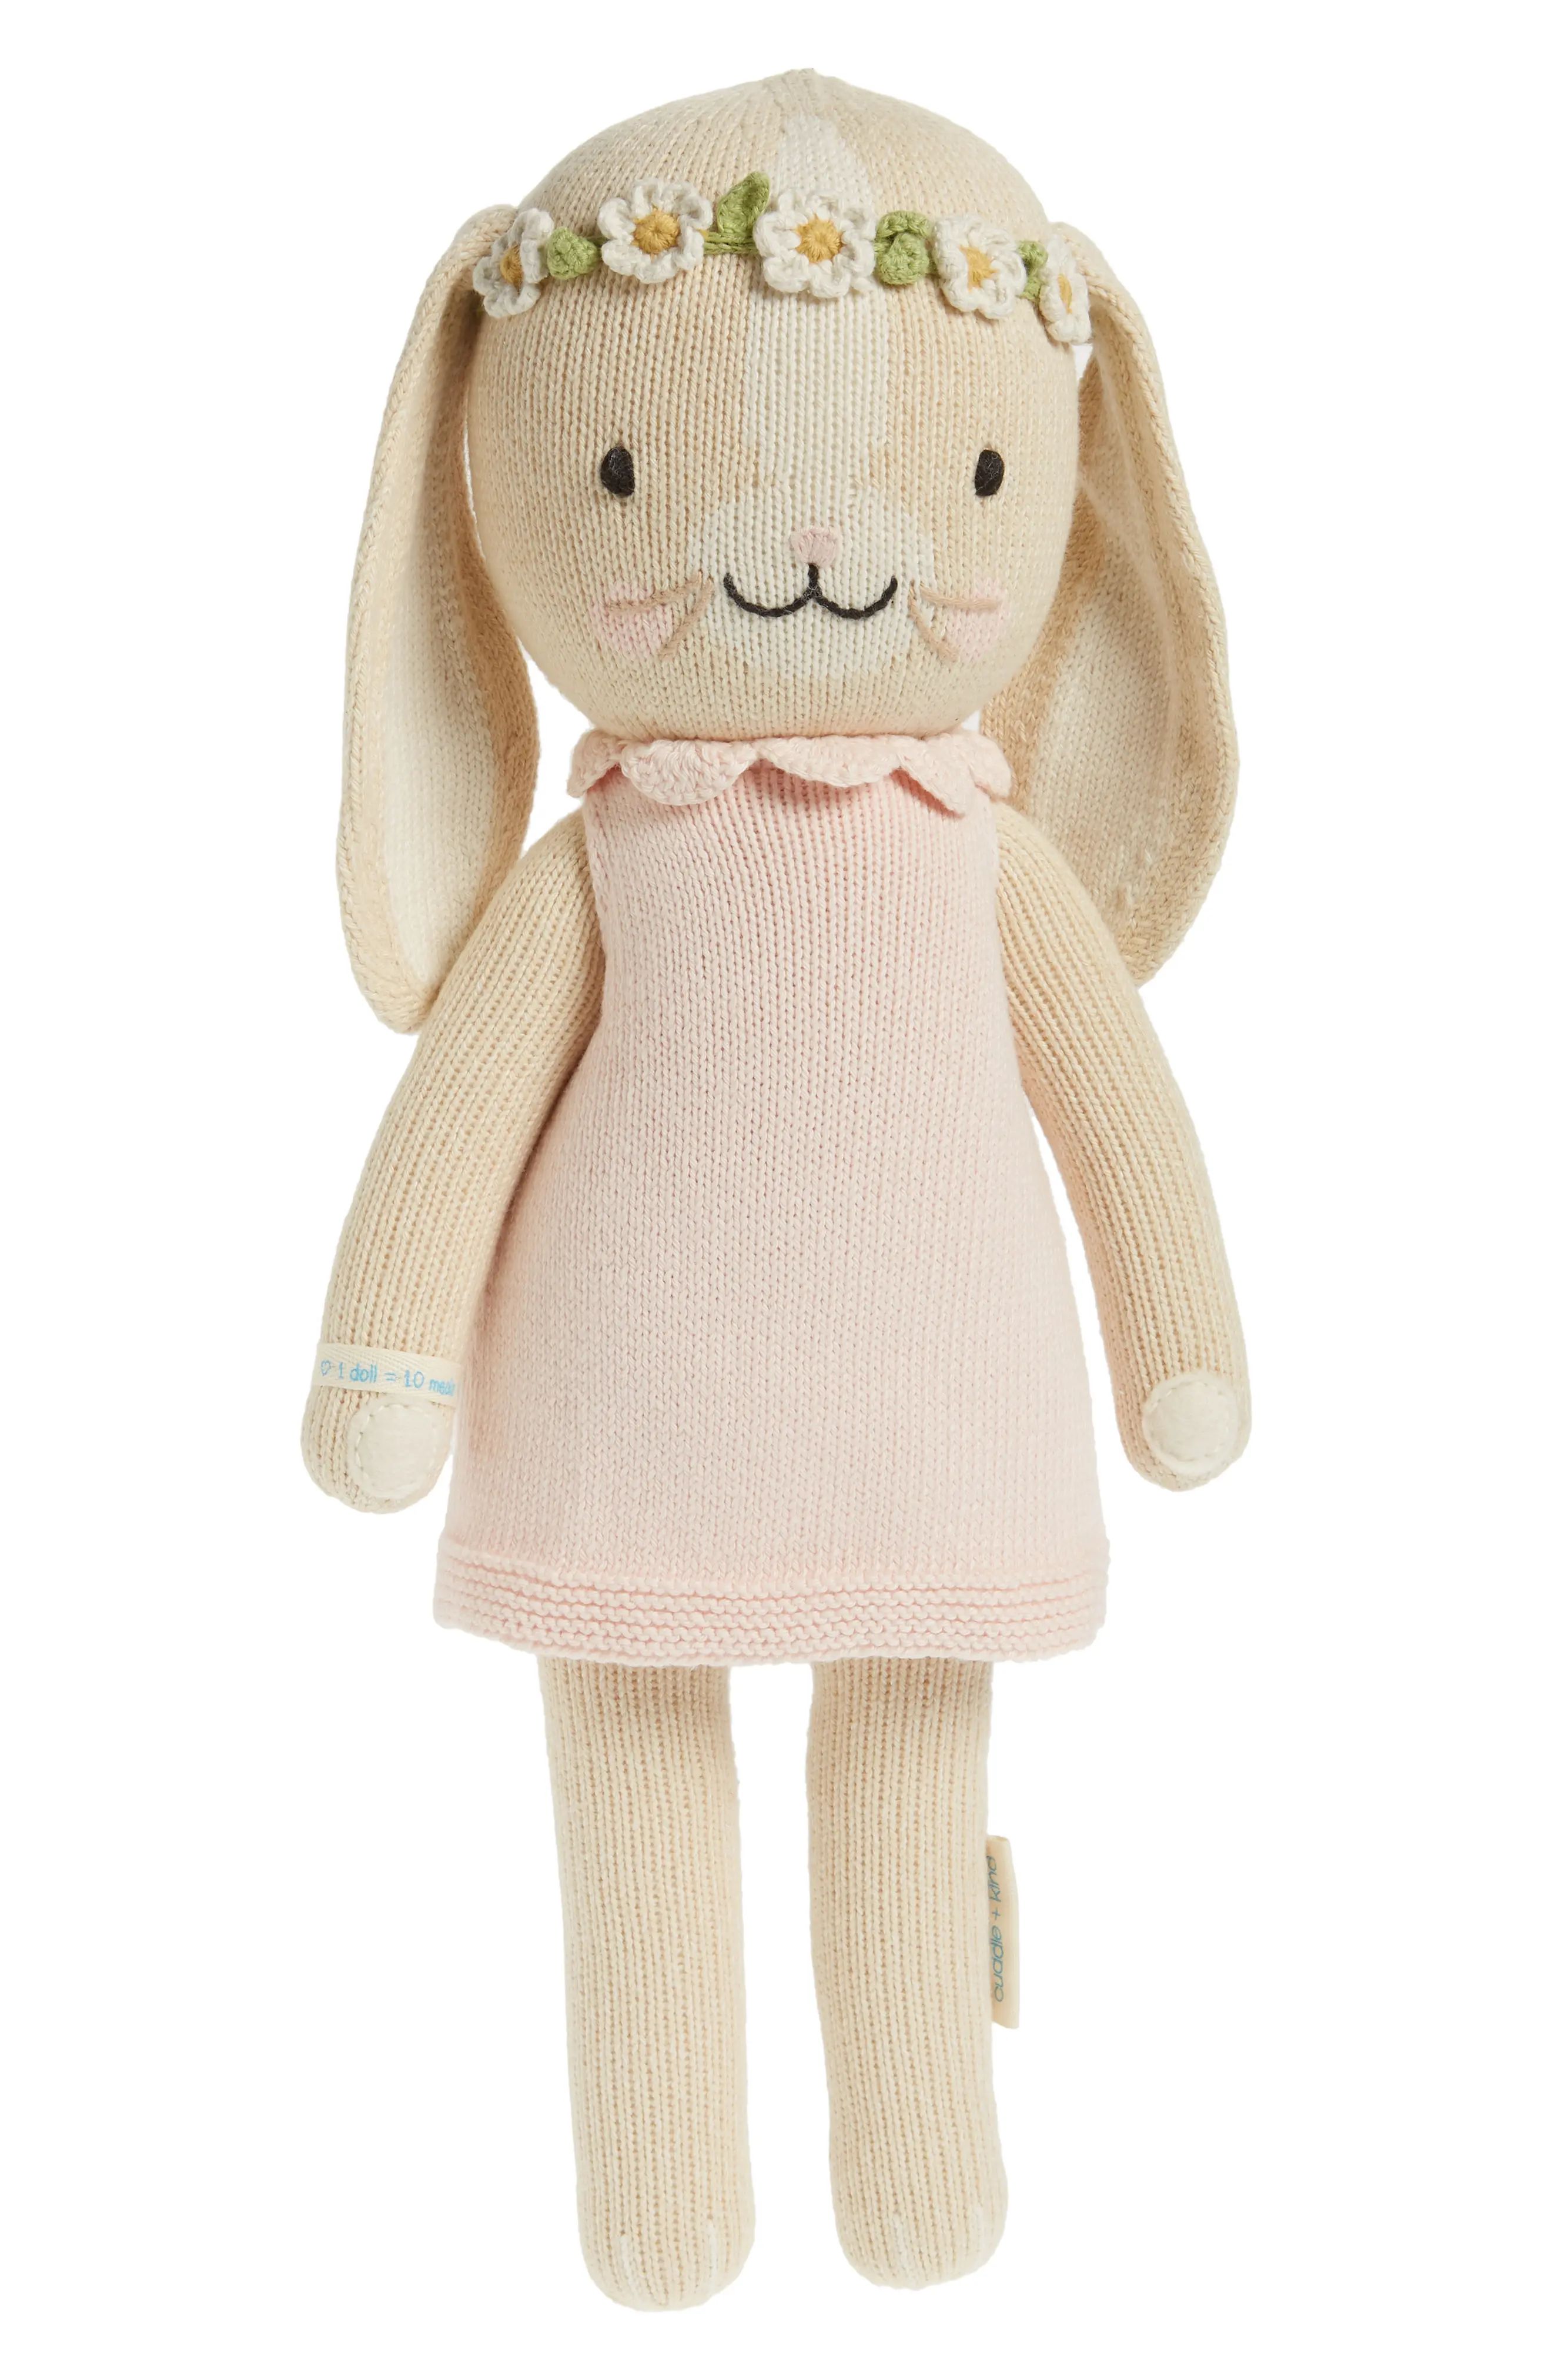 cuddle+kind cuddle + kind Blush Hannah the Bunny Stuffed Animal in Pink at Nordstrom | Nordstrom